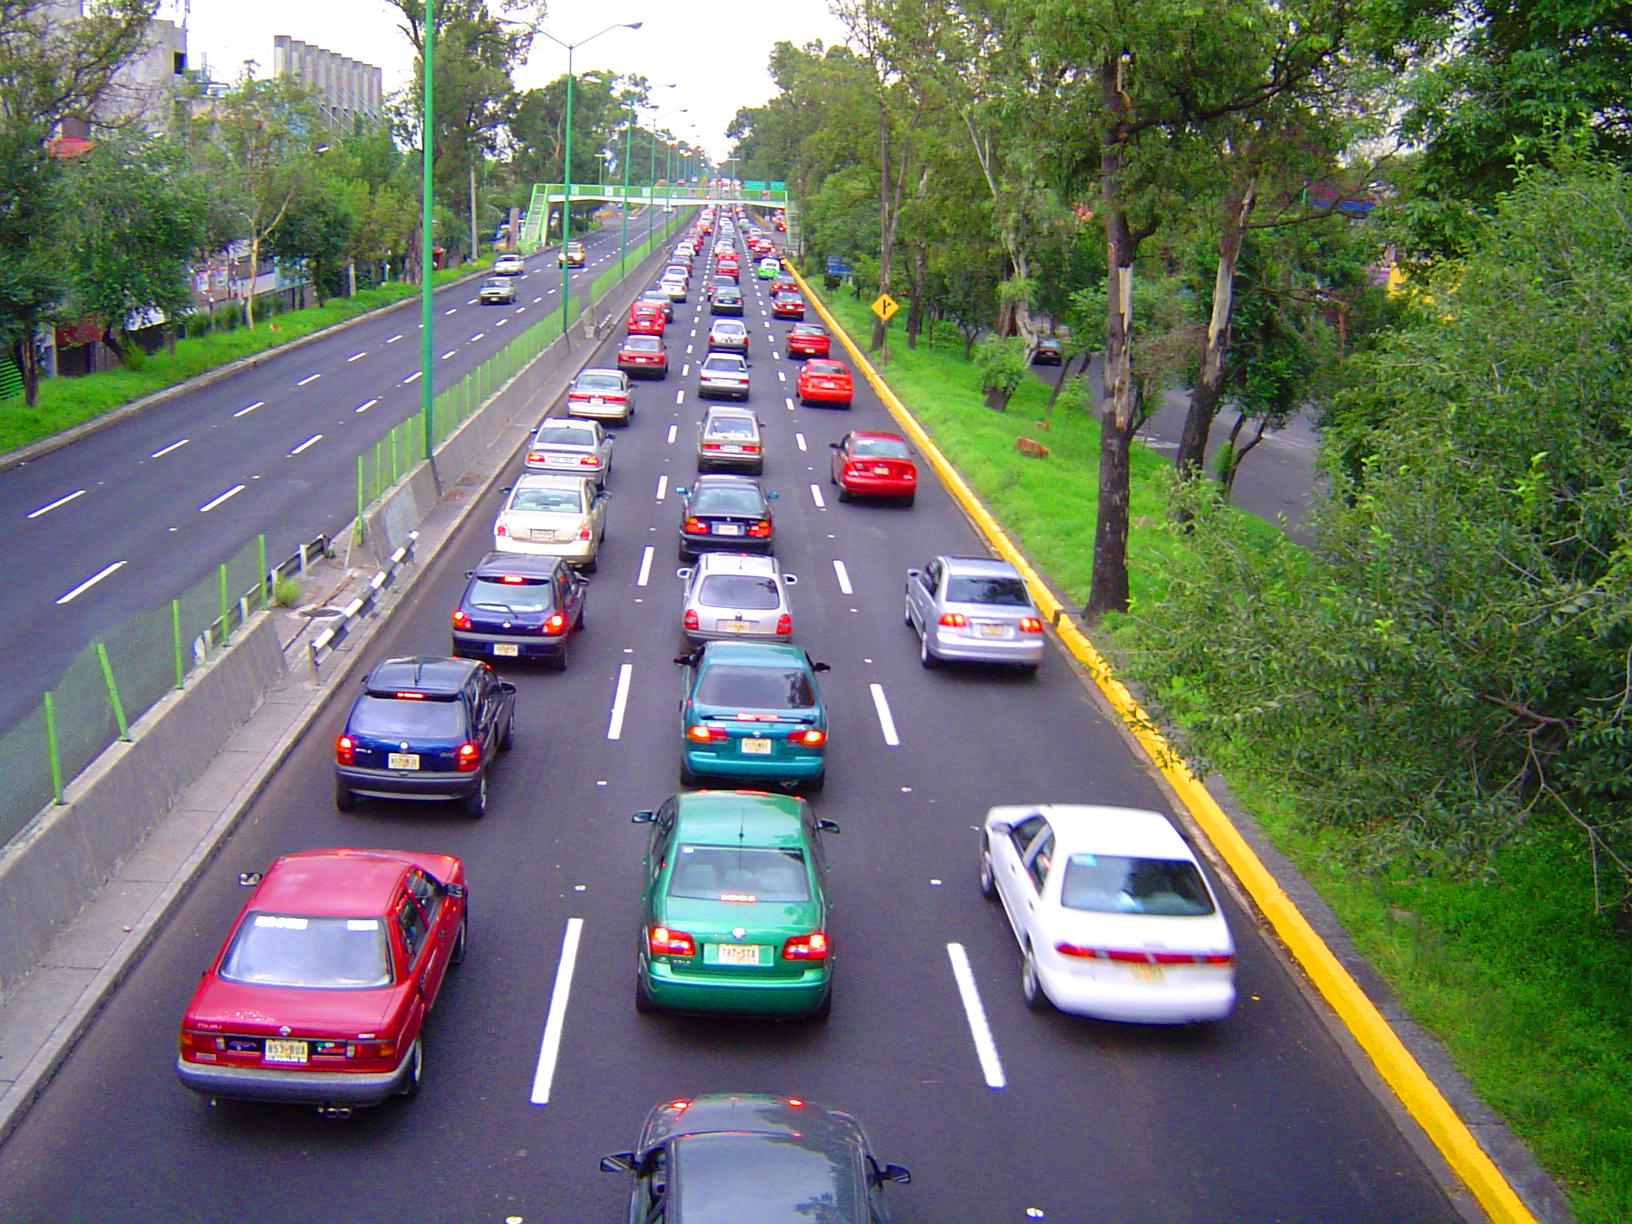 Traffic in Mexico City